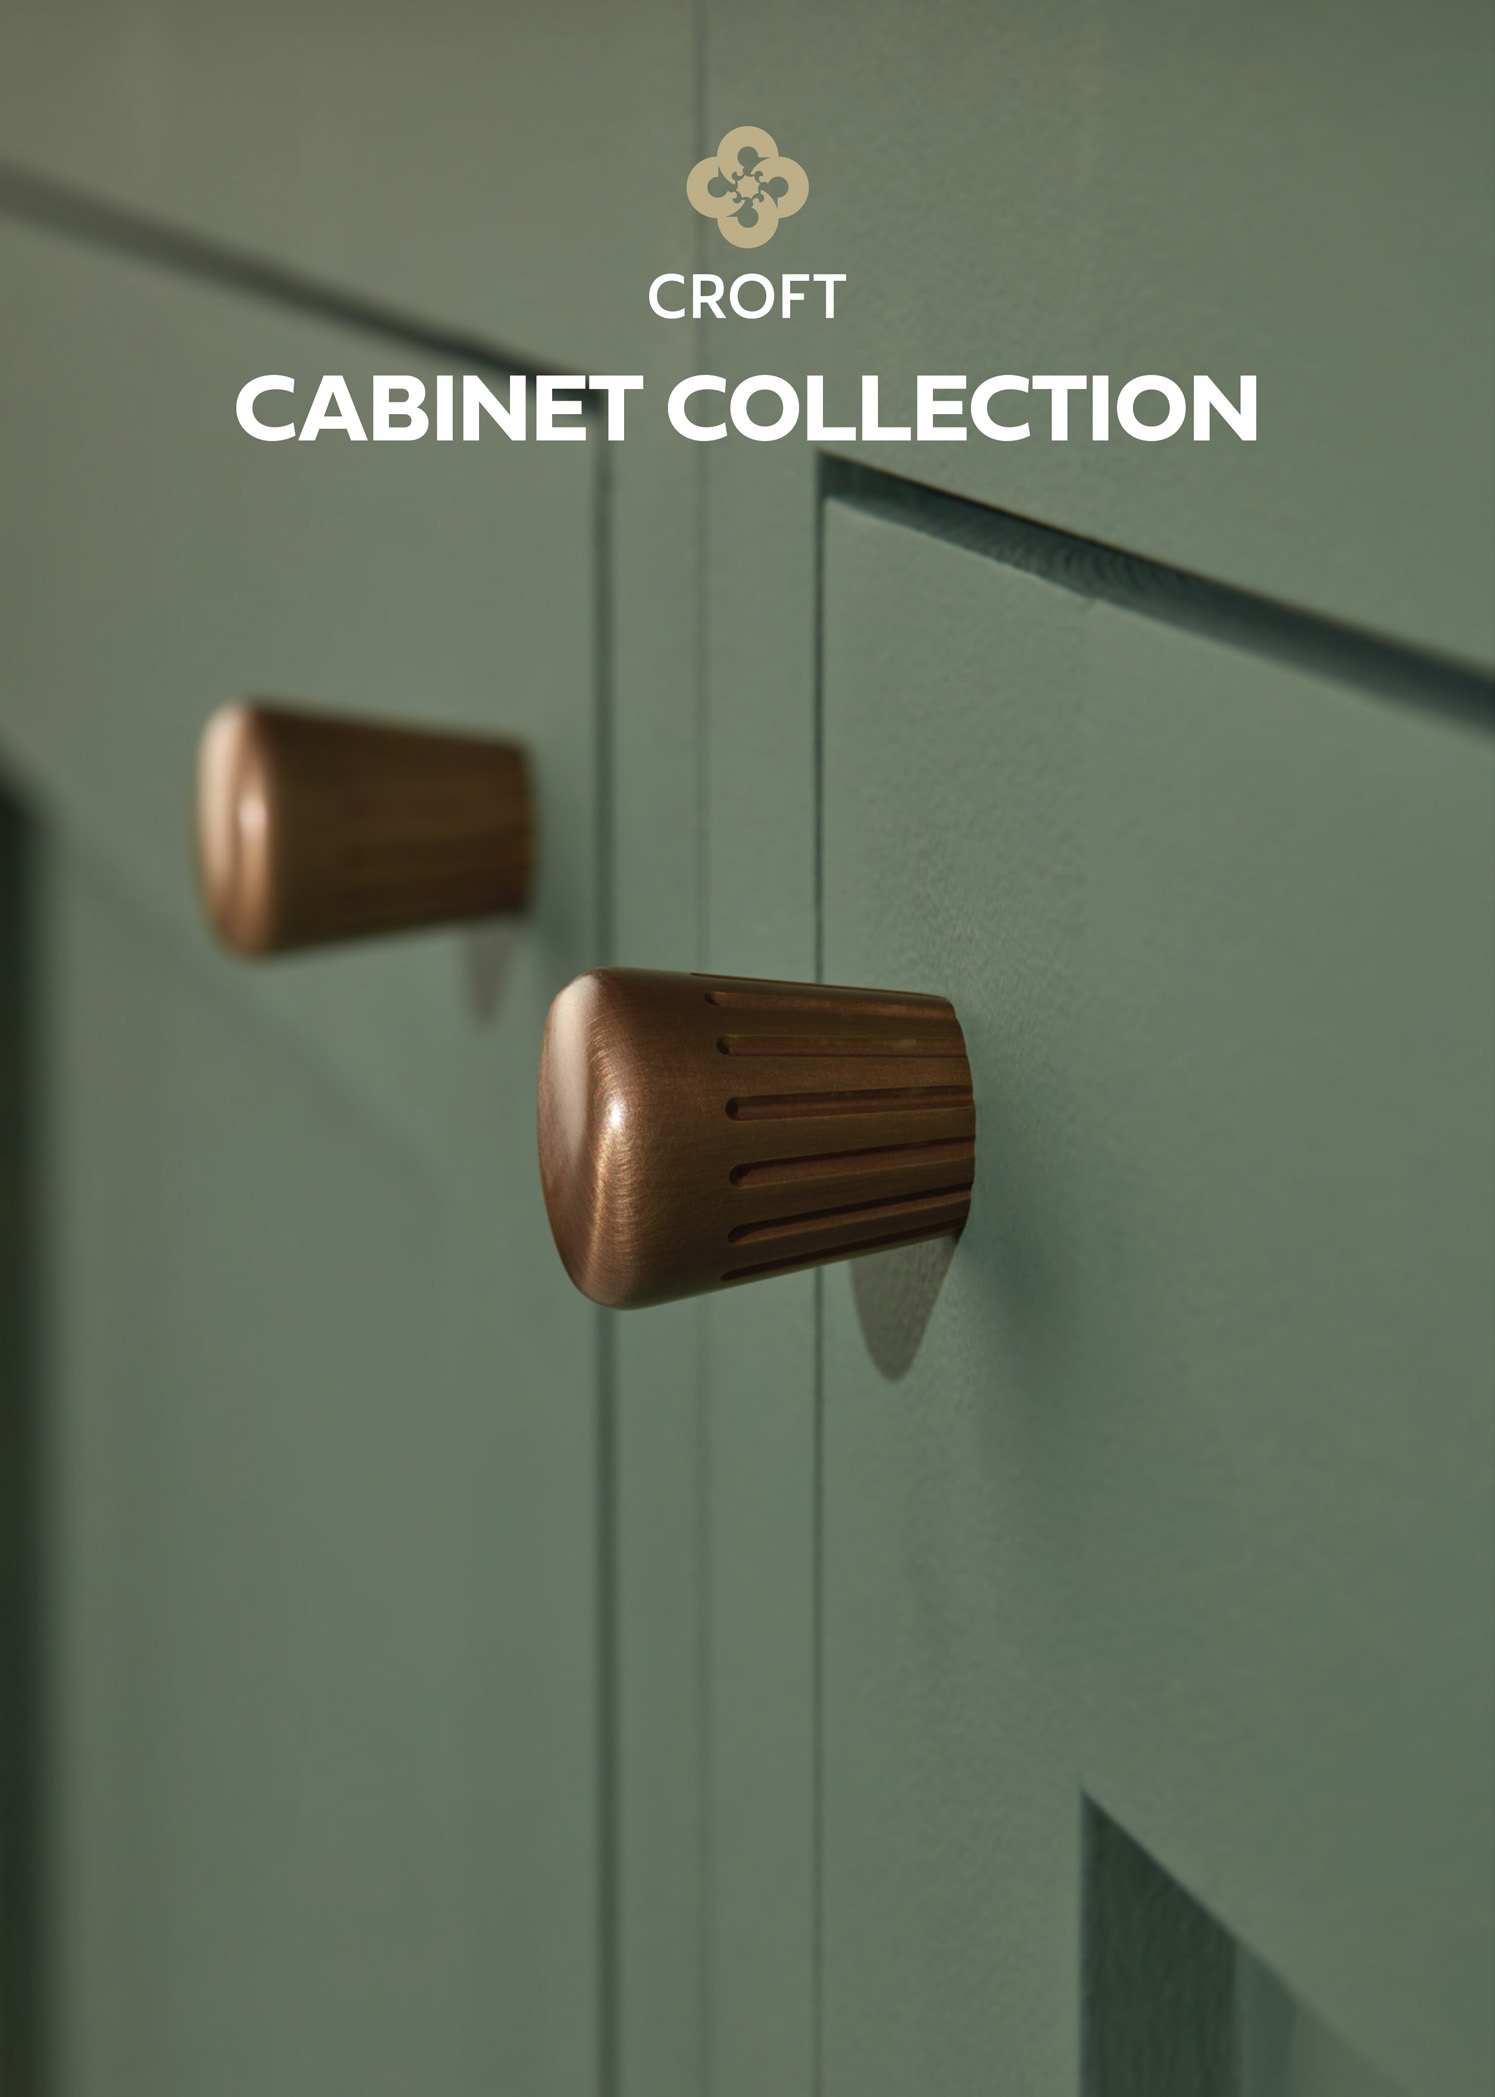 Cabinet collection brochure by Croft